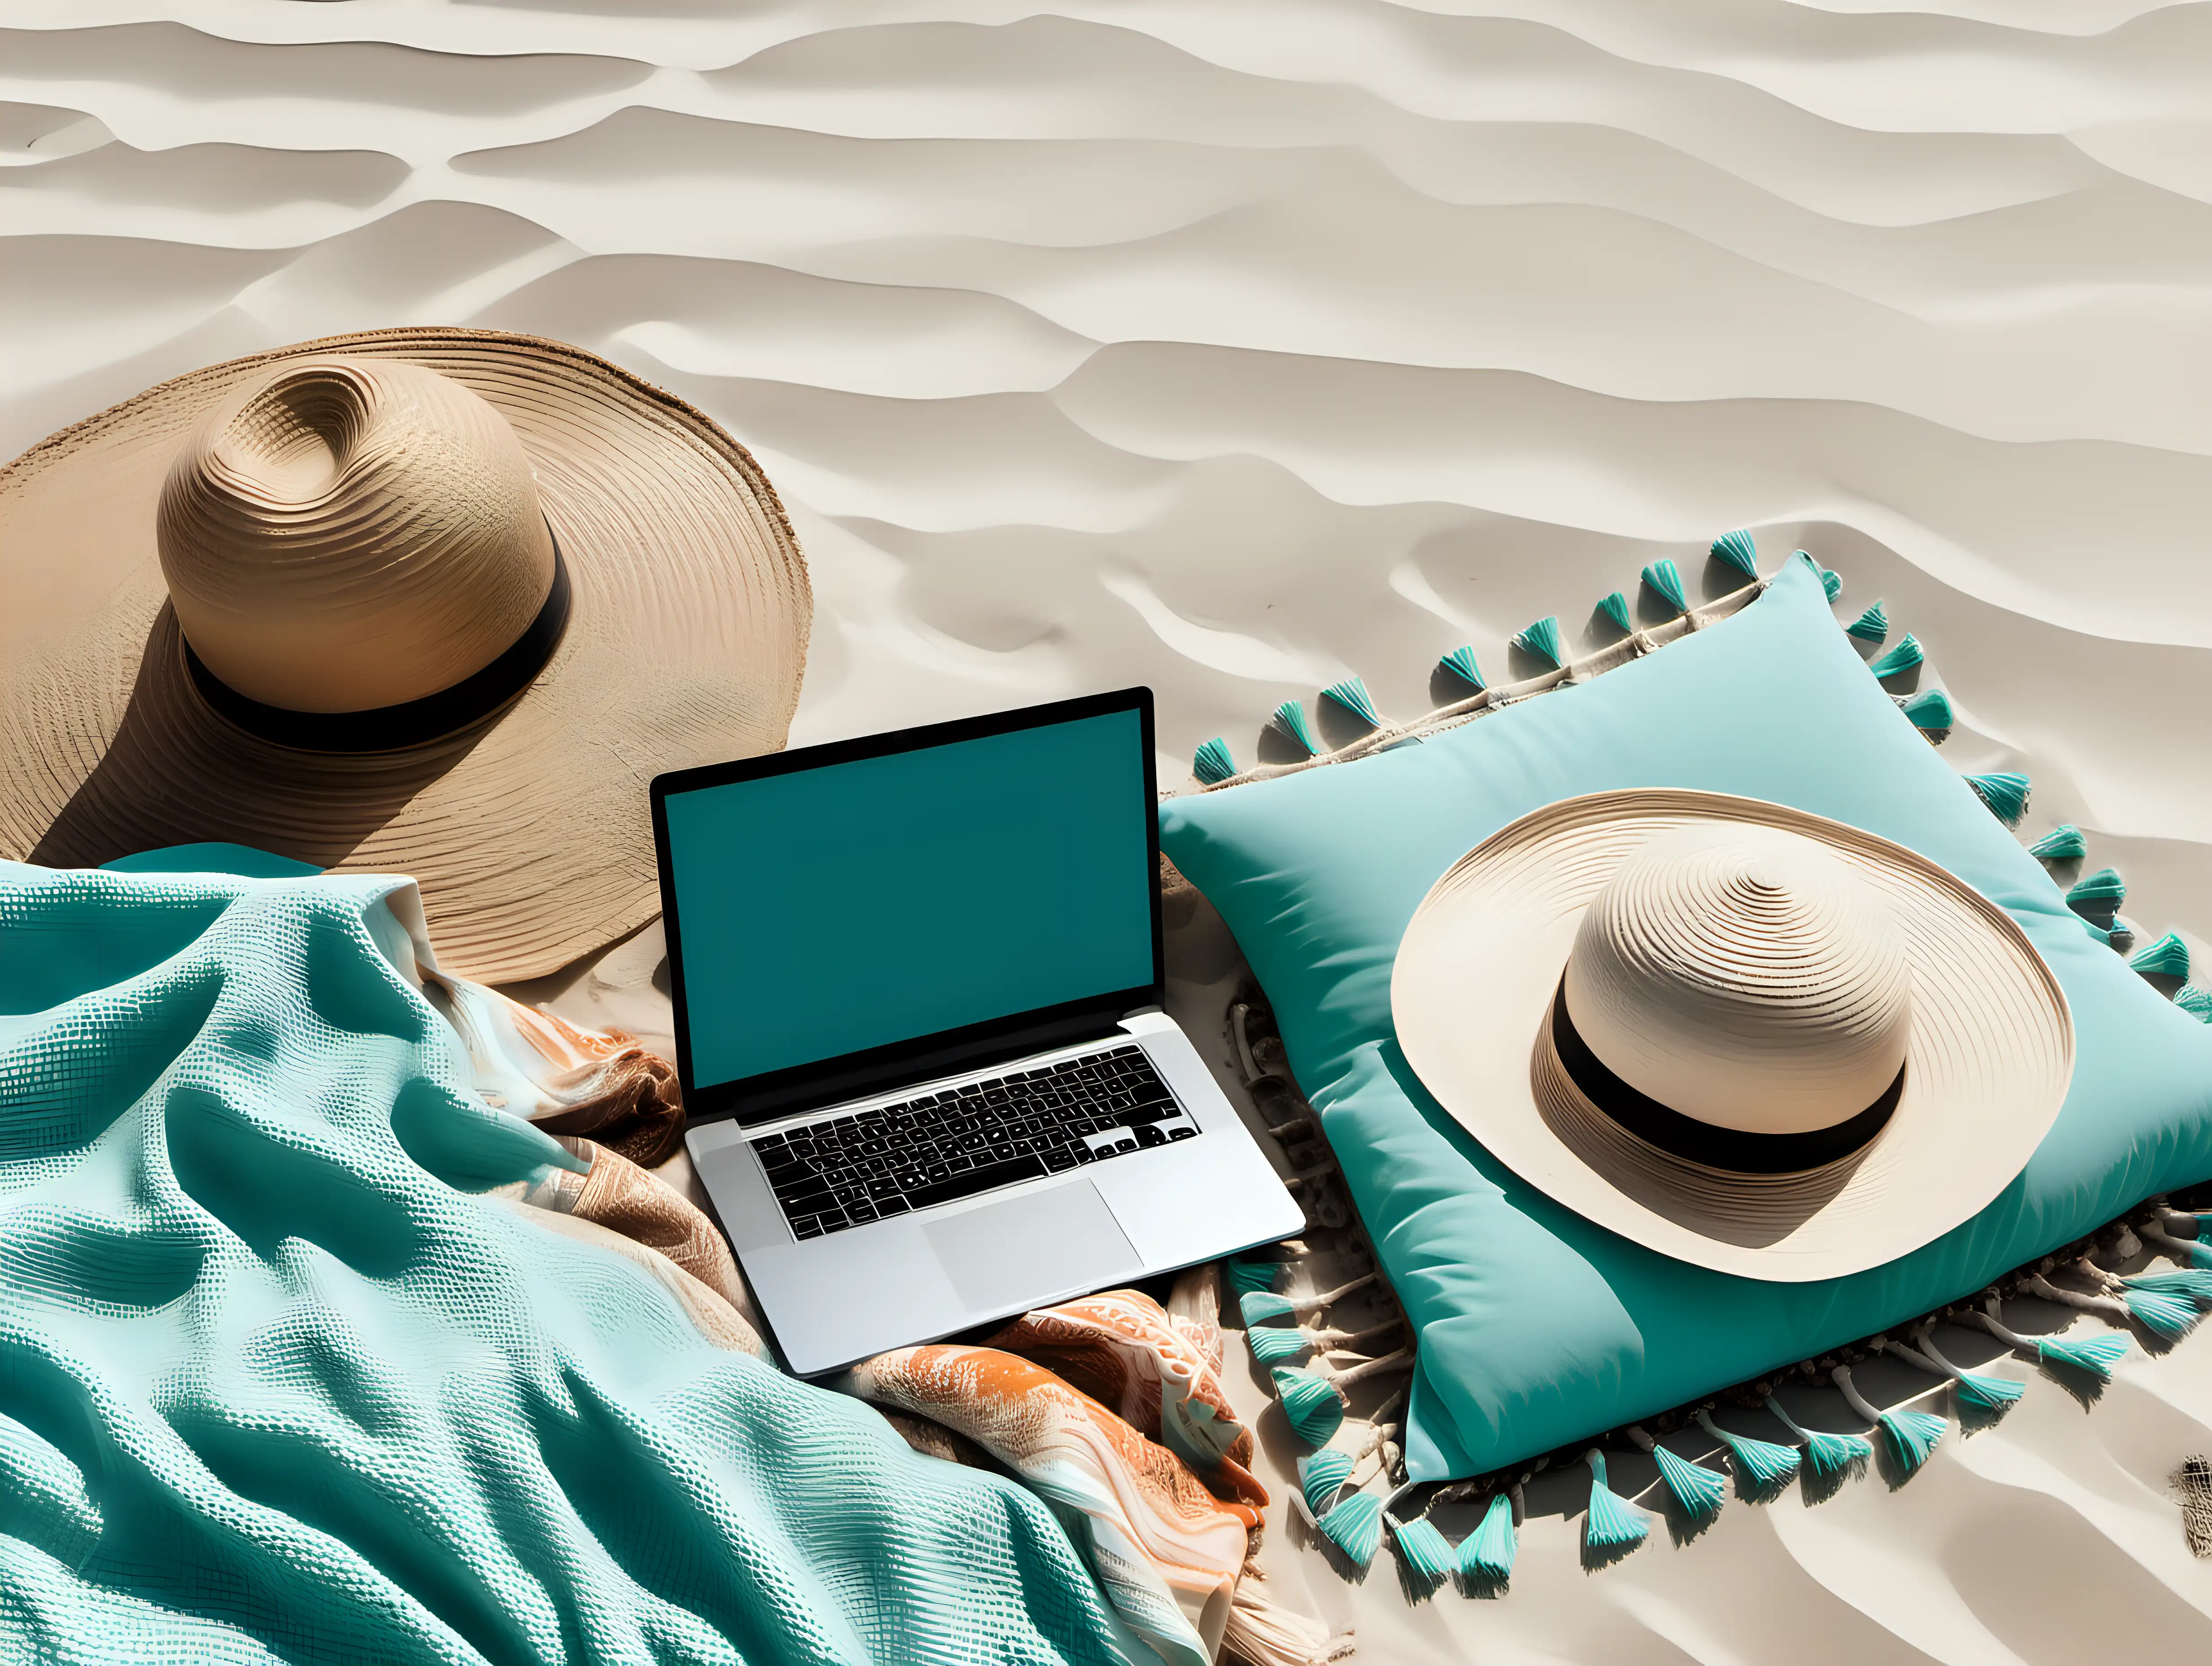 beach scene on sand with closed laptop, blanket, boho pillow and beach hat, neutrals and pop of light teal, upscale